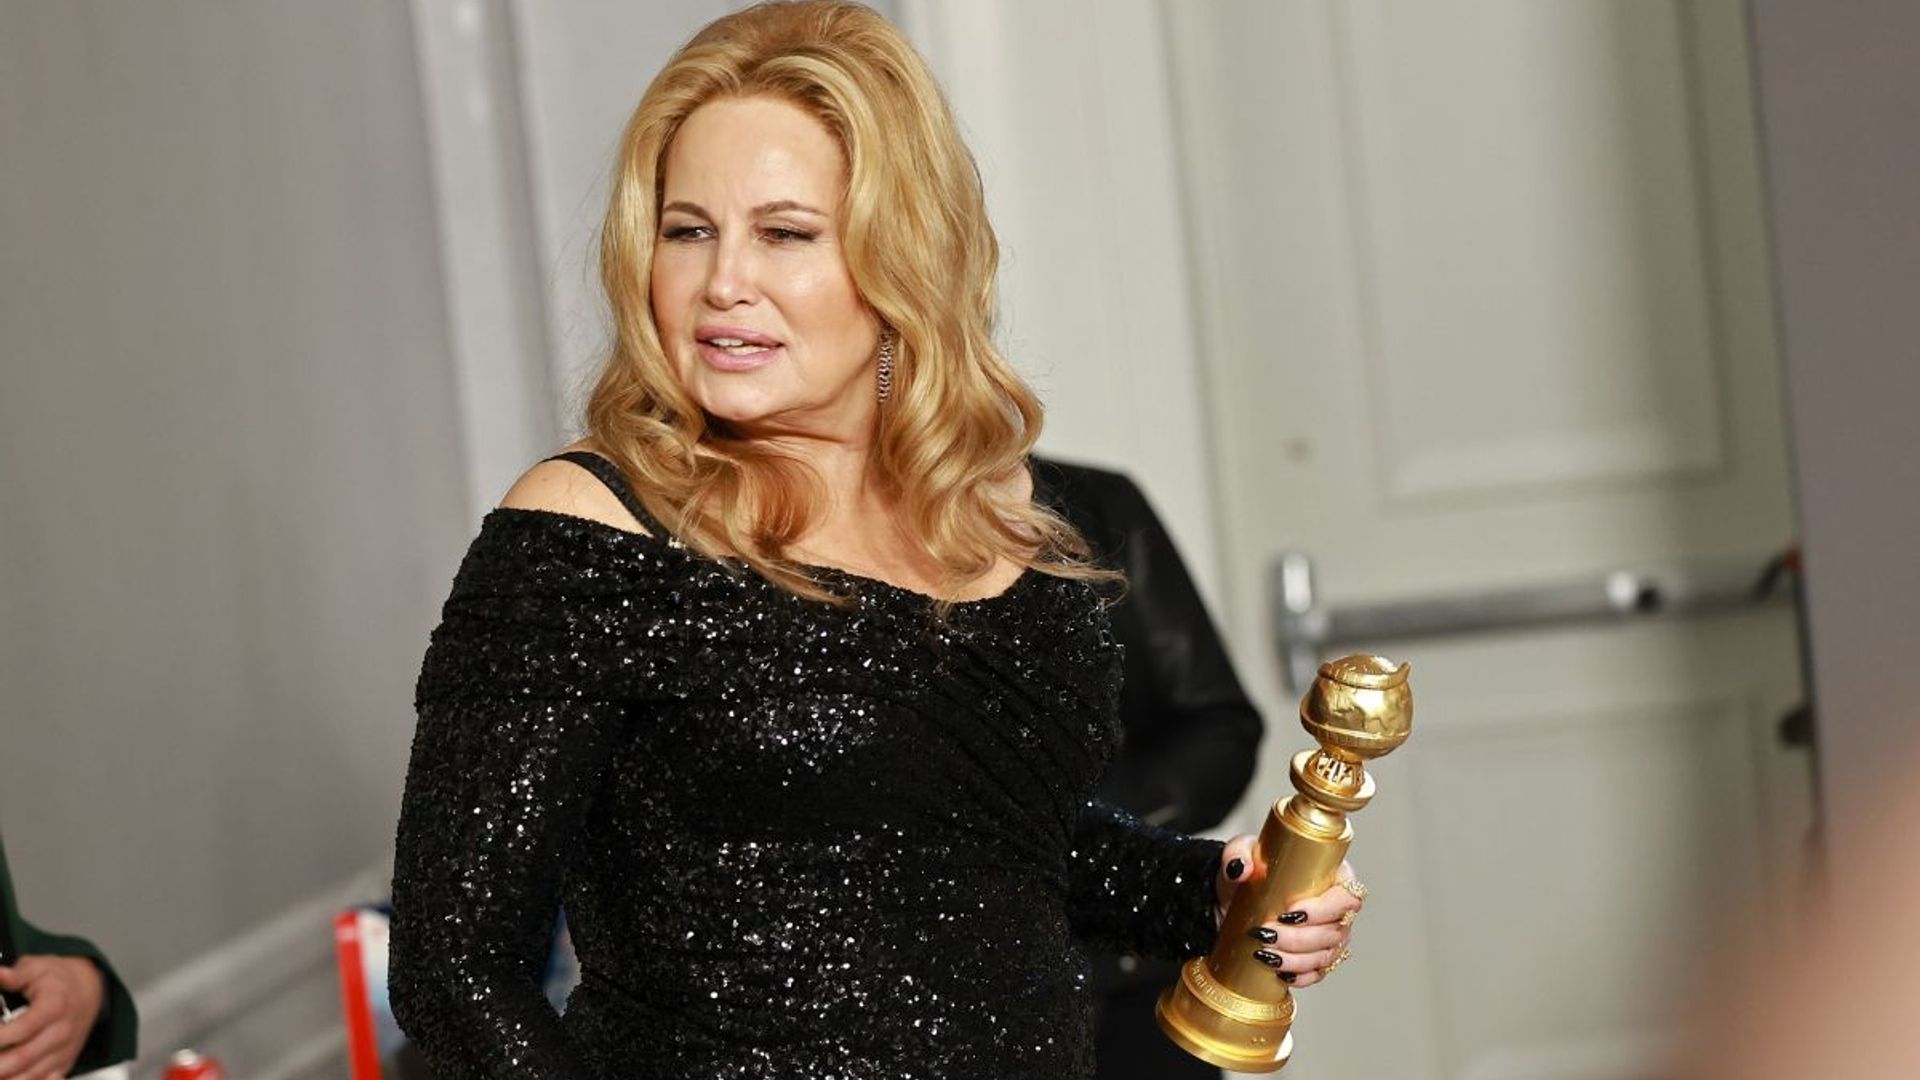 Jennifer Coolidge takes makeup tips from Victoria Beckham for the 2023 Golden Globes – see photos